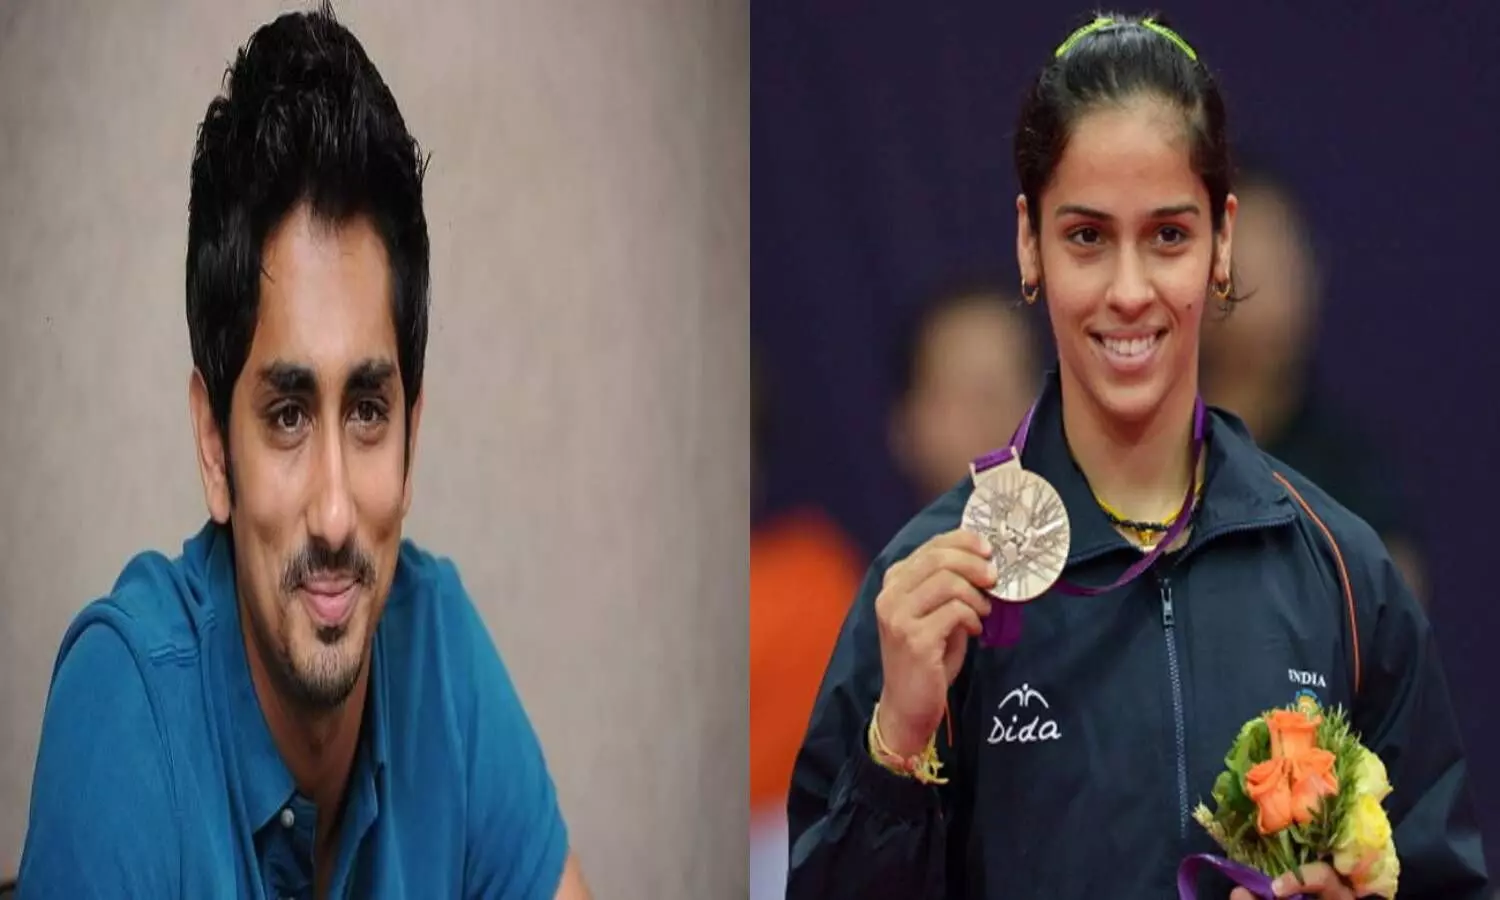 Sexist comment row: Siddharth apologies to Saina; says shell always be his champion